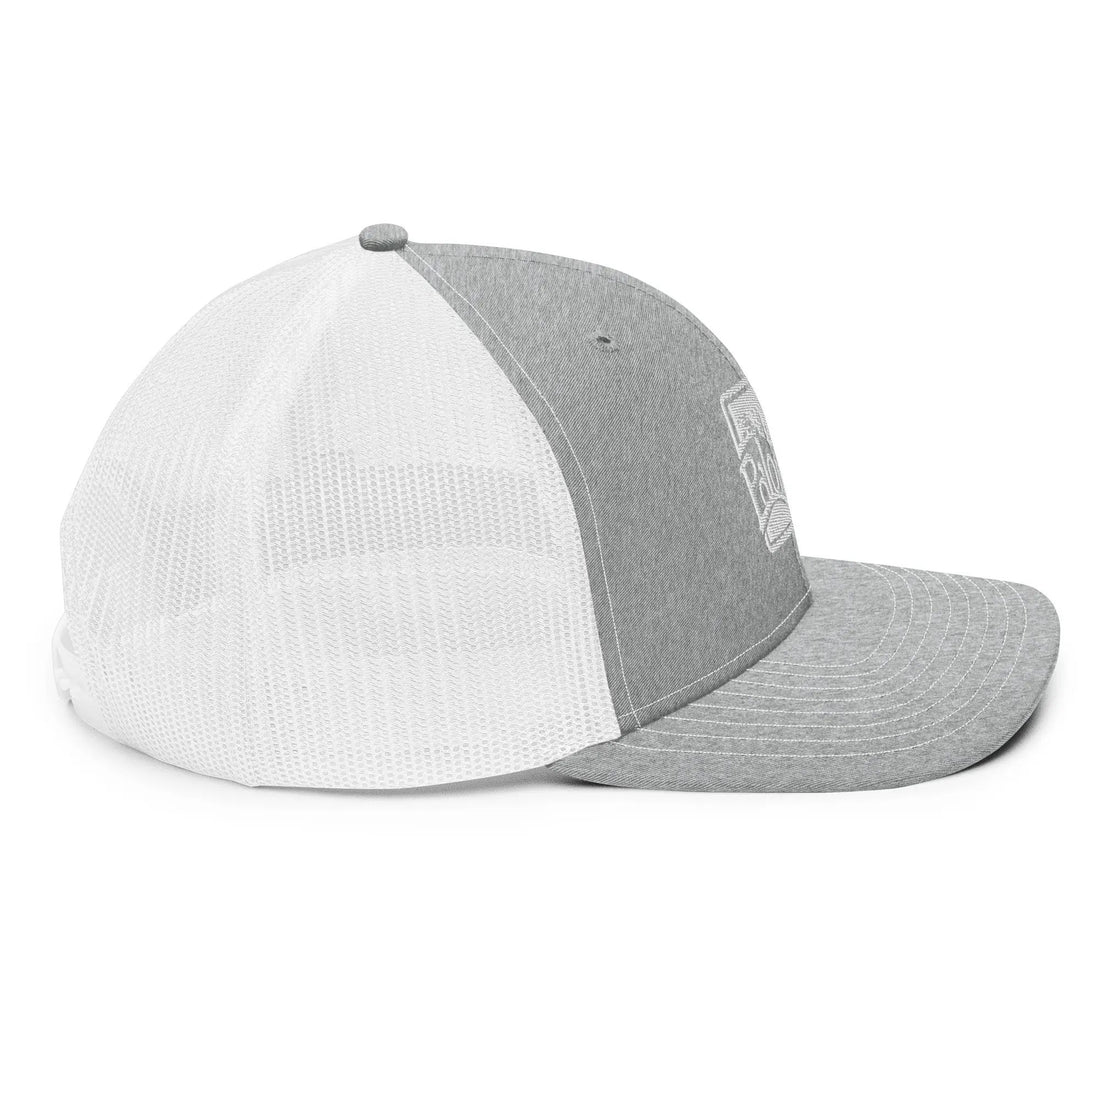 a grey and white hat on a white background